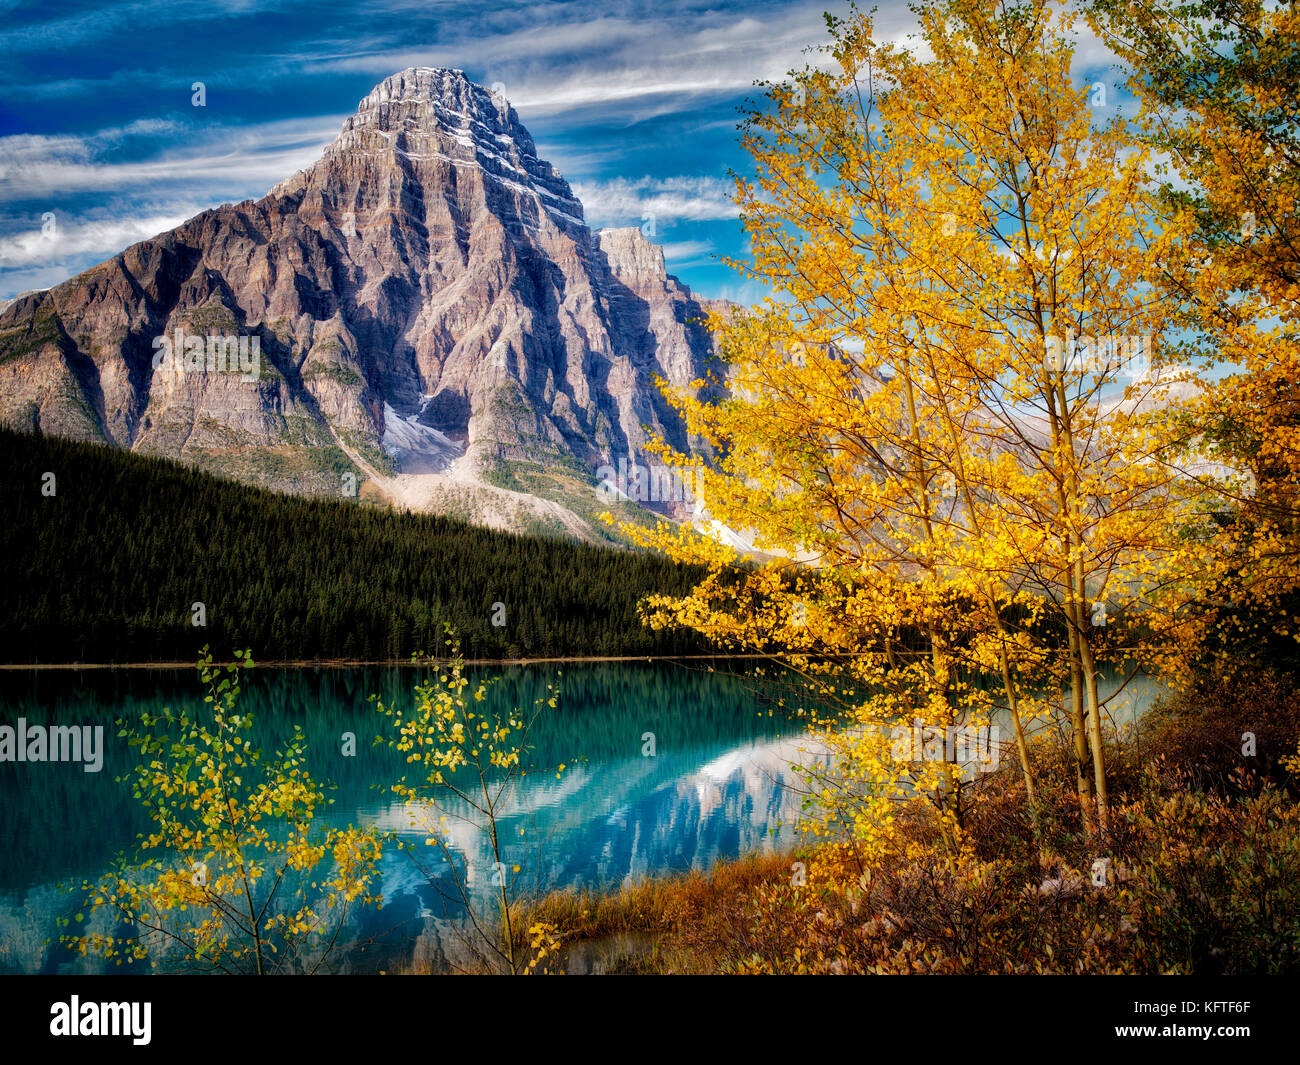 Waterfaowl Lakes and Mt. Chephren with fall colored aspens.  Banff National Park. Alberta, Canada Stock Photo